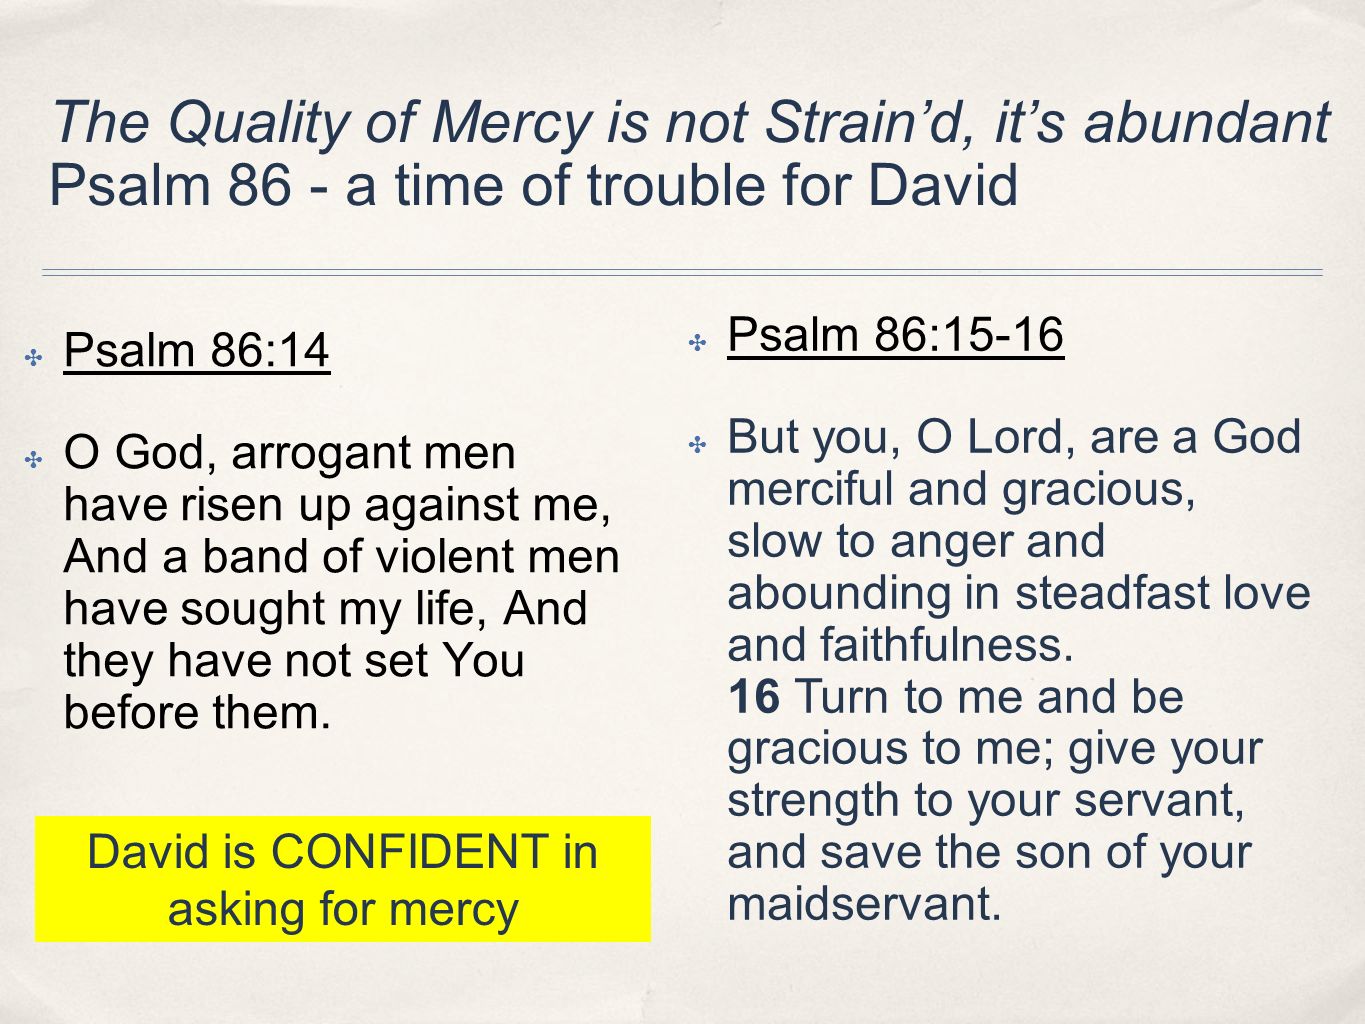 David is CONFIDENT in asking for mercy